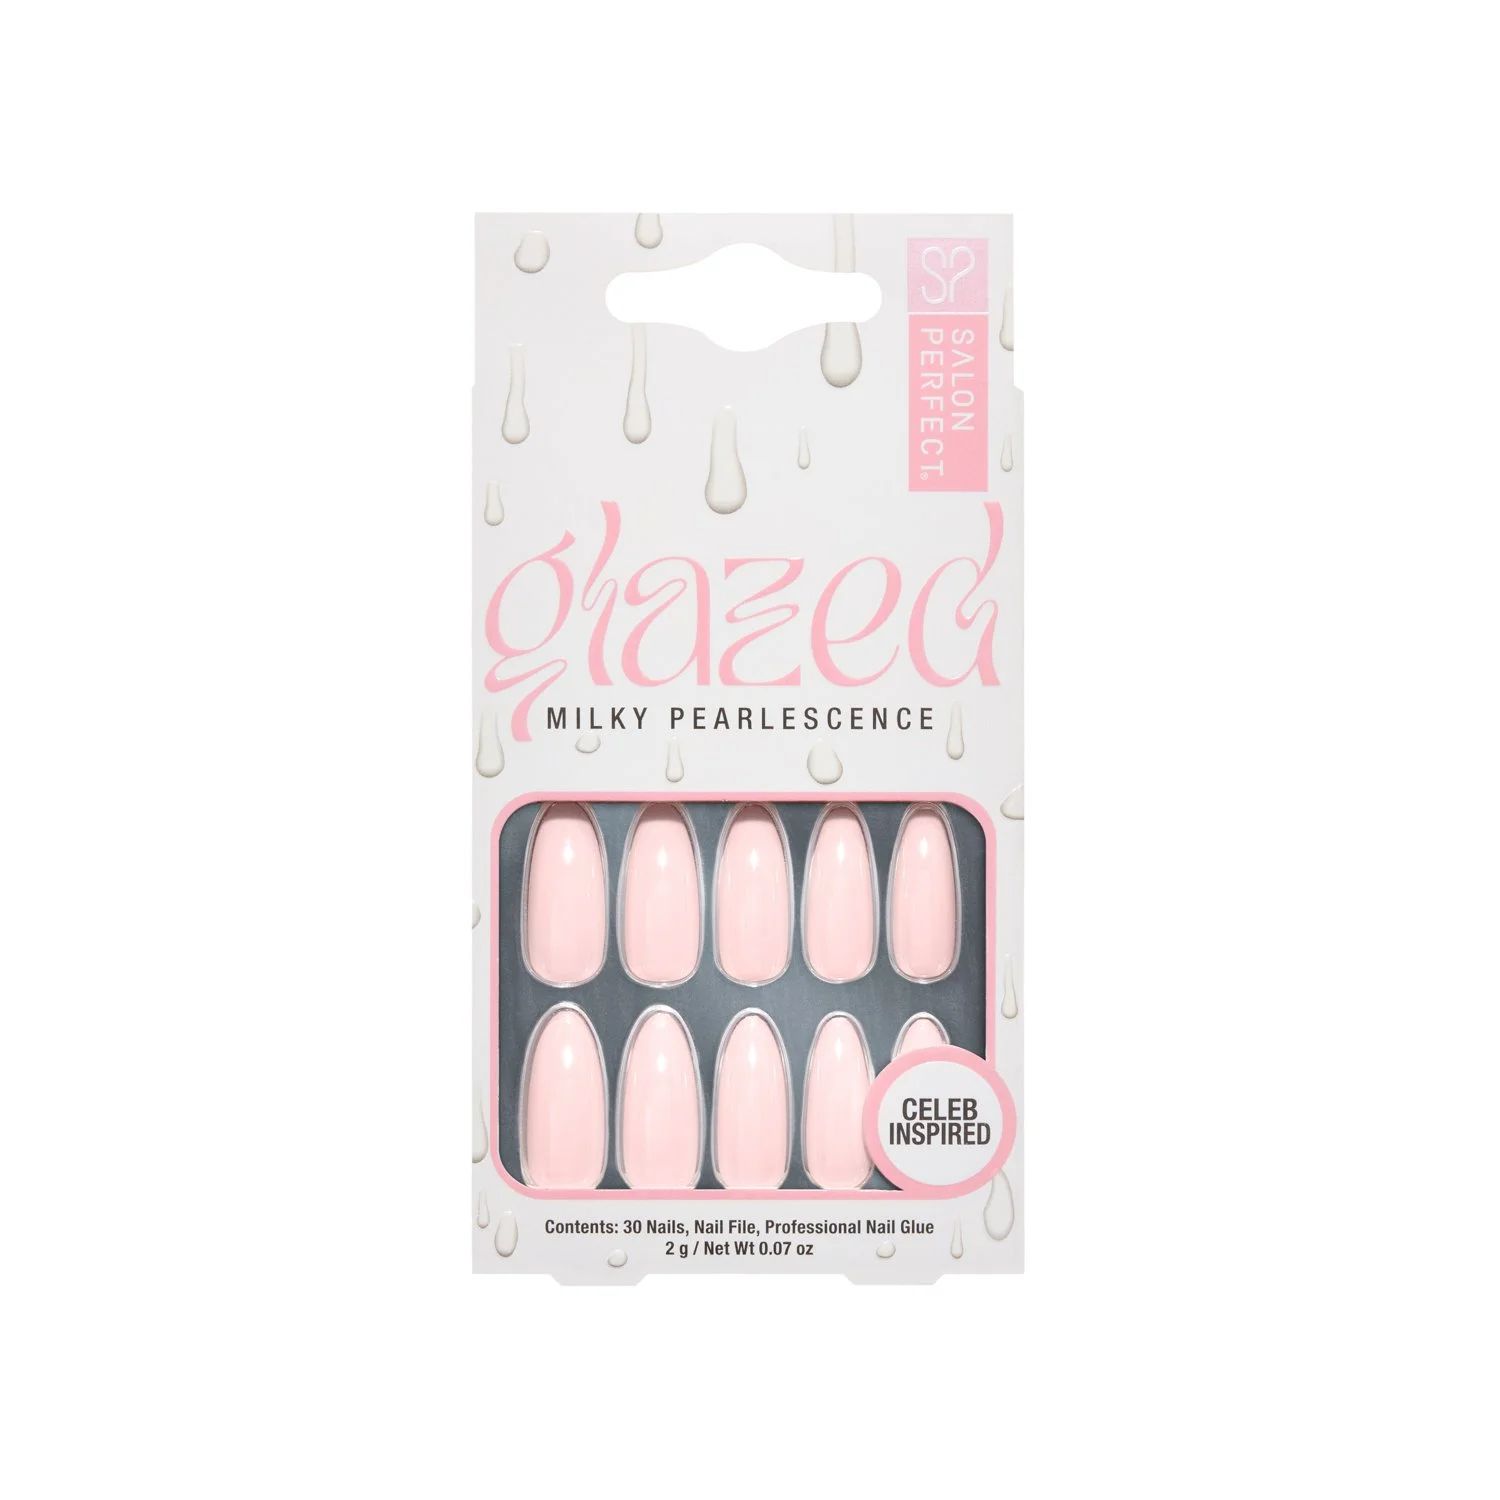 Salon Perfect Glazed Milky Pearlescent Pink Nail Set, File & Glue Included, 30 Pieces | Walmart (US)